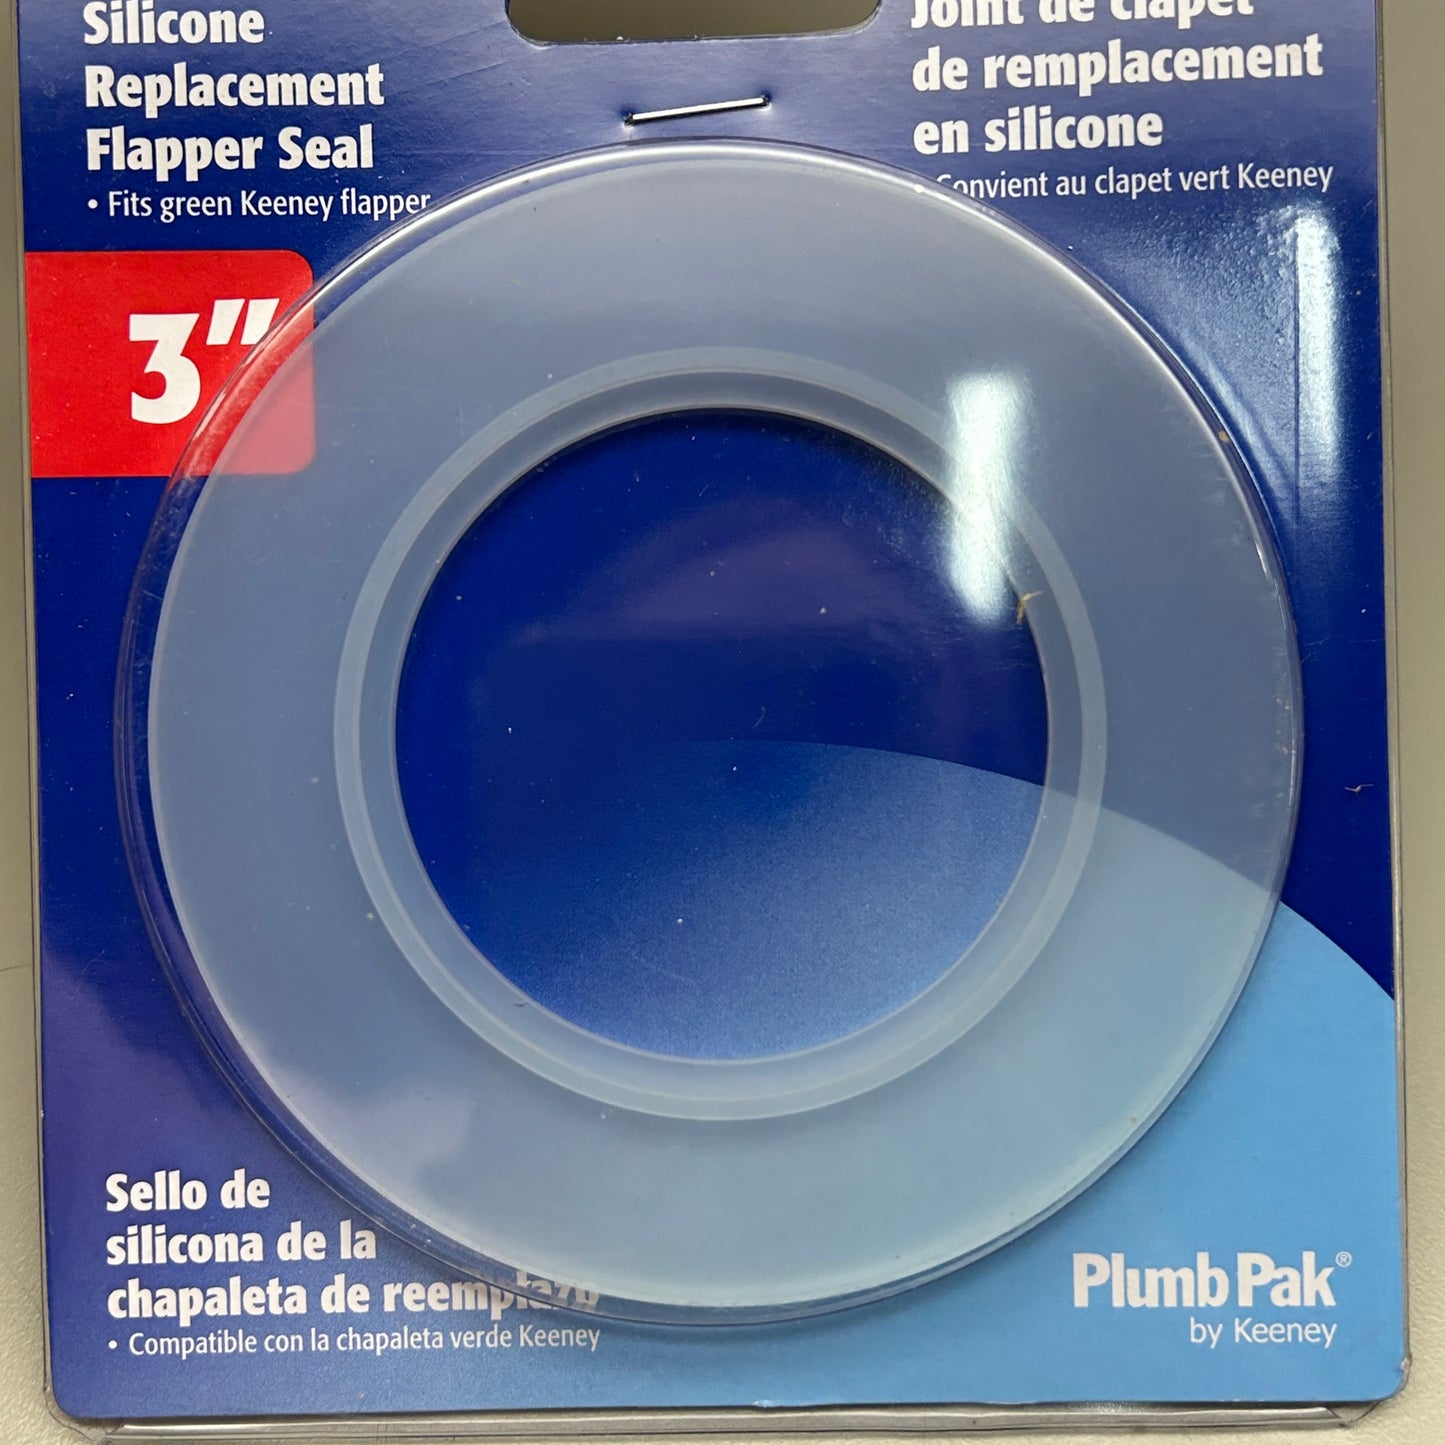 PLUMB PAK 6-PACK! Silicone Replacement Flapper Seal Fits Green Keeney Flapper 3" (New)